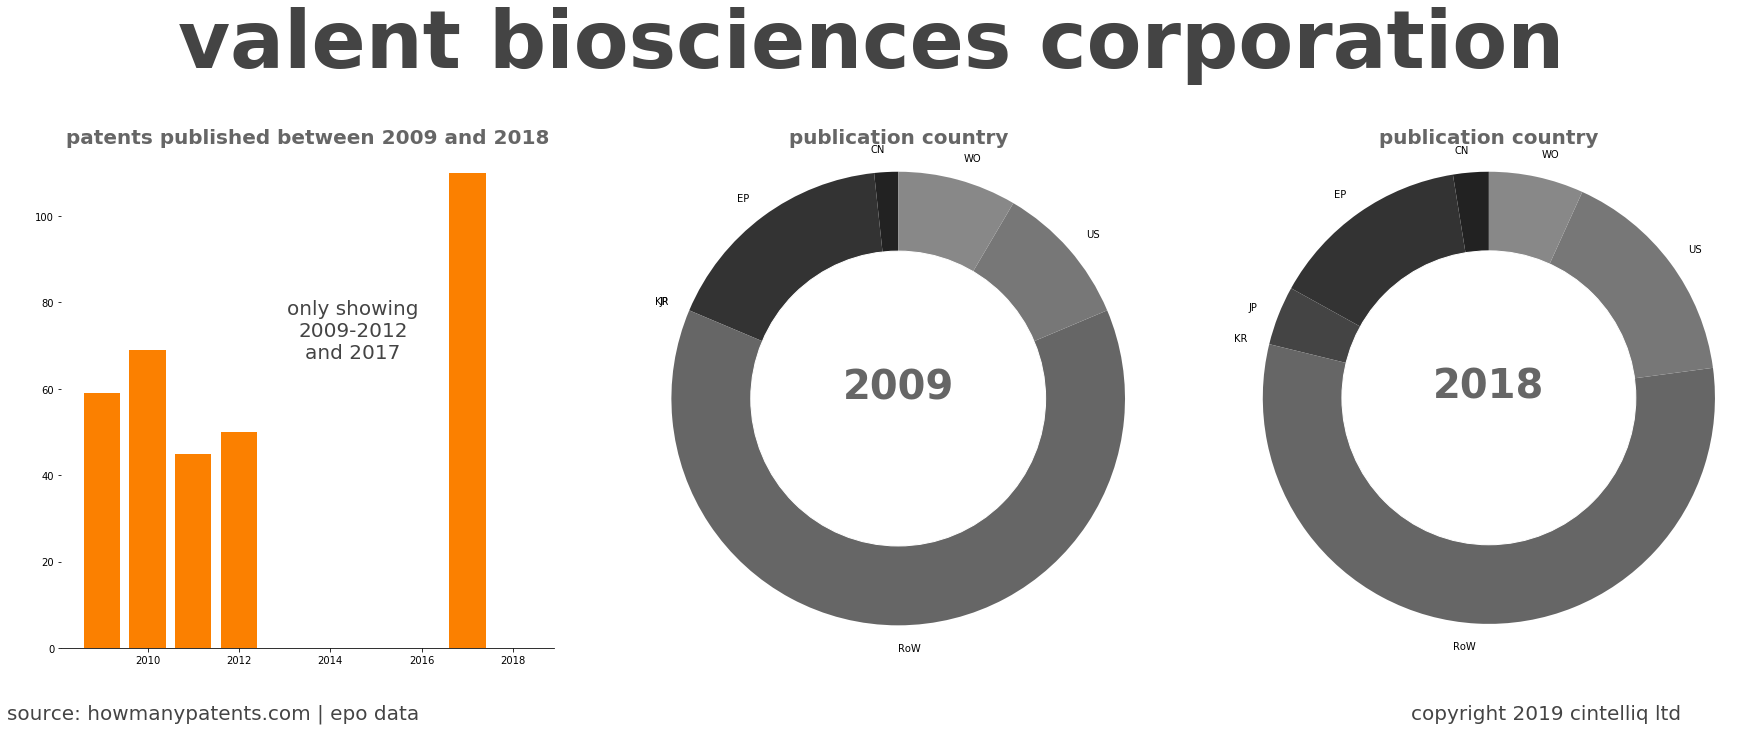 summary of patents for Valent Biosciences Corporation